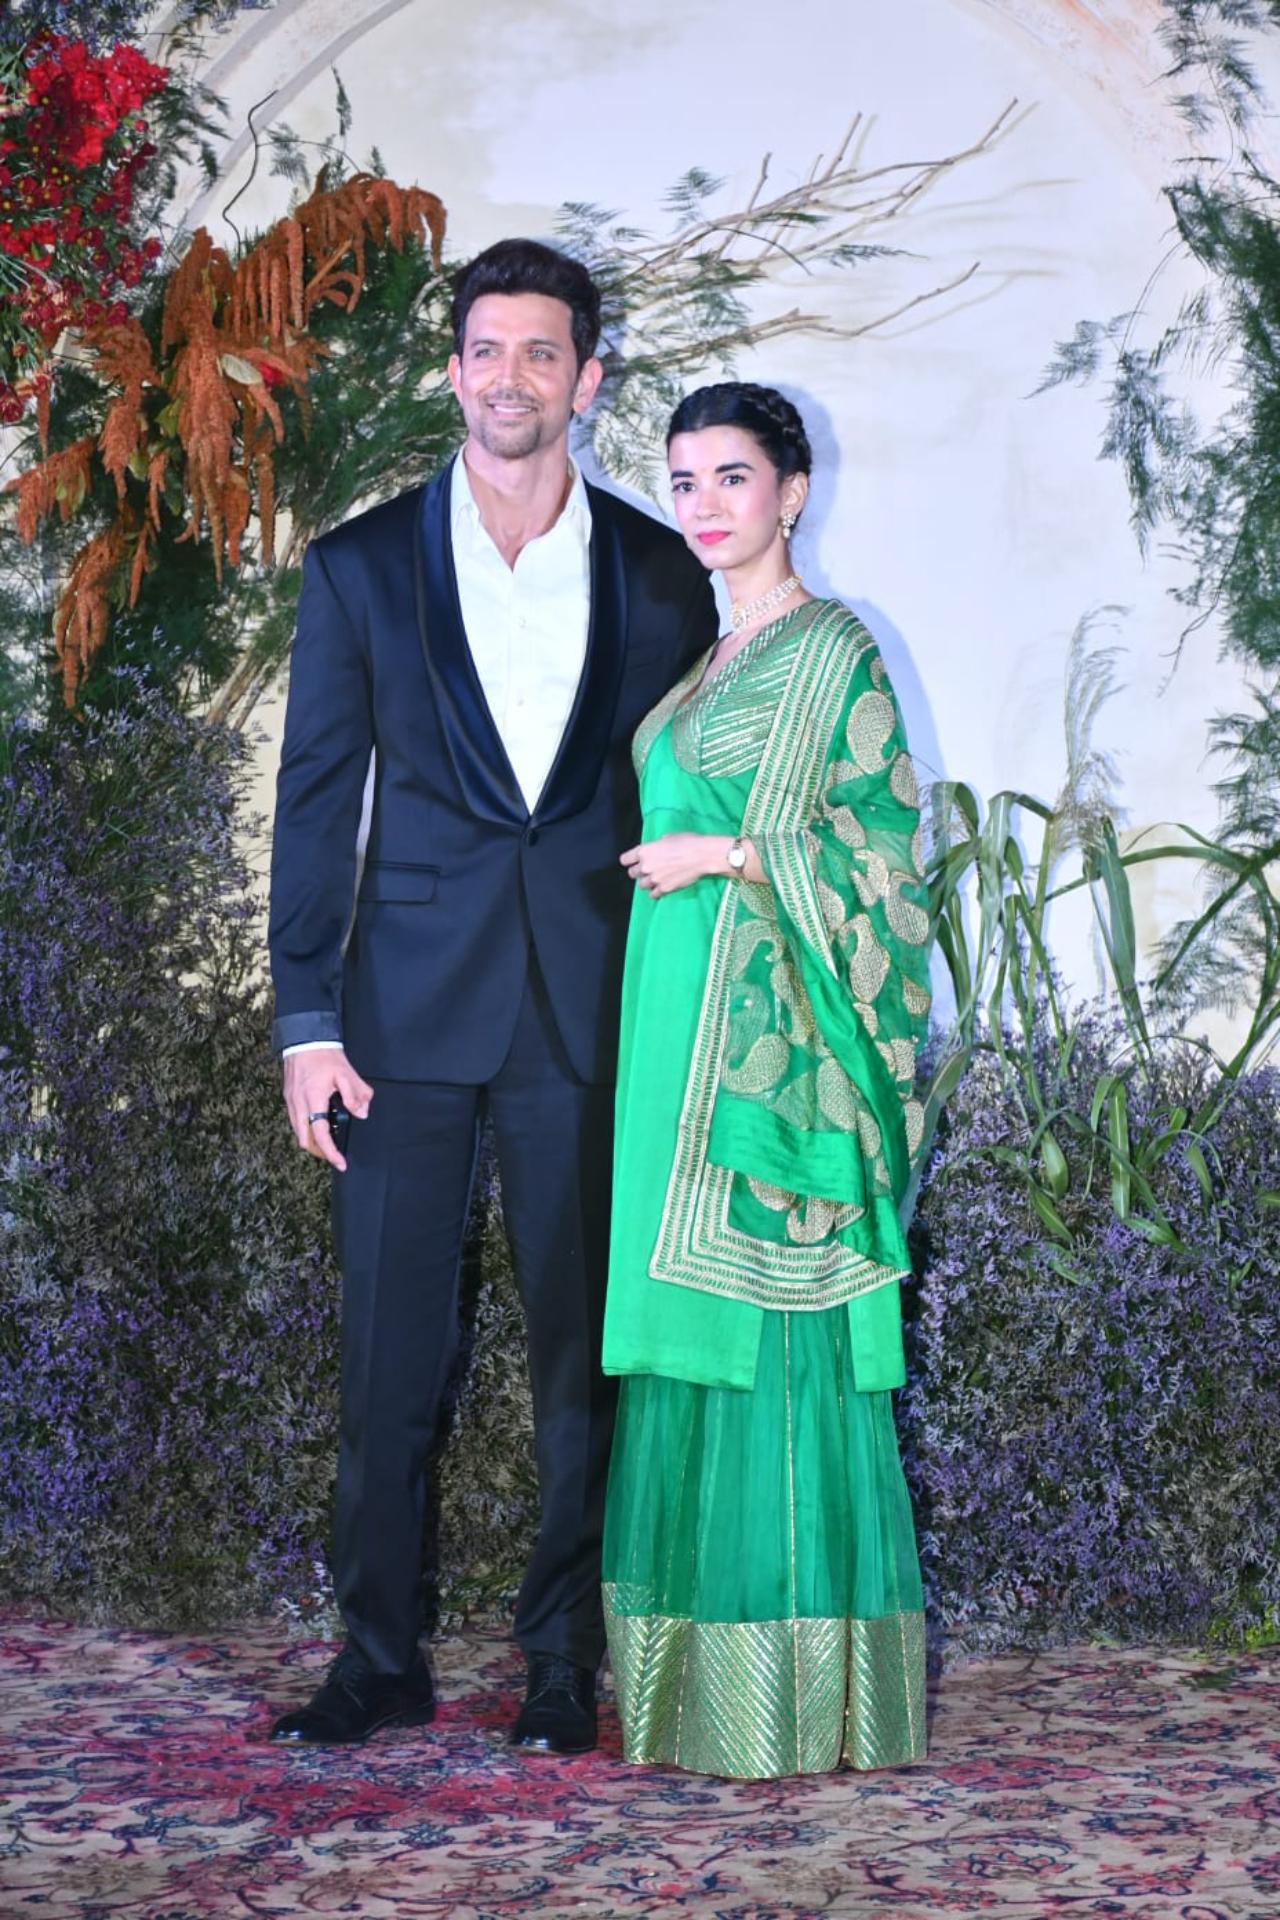 Hrithik Roshan and Saba Azad made a couple-entry at the venue. The 'Vikram Vedha' star was dressed in a crisp black suit, on the other hand, Saba kept it all traditional, as she opted for a lustrous green kurta set